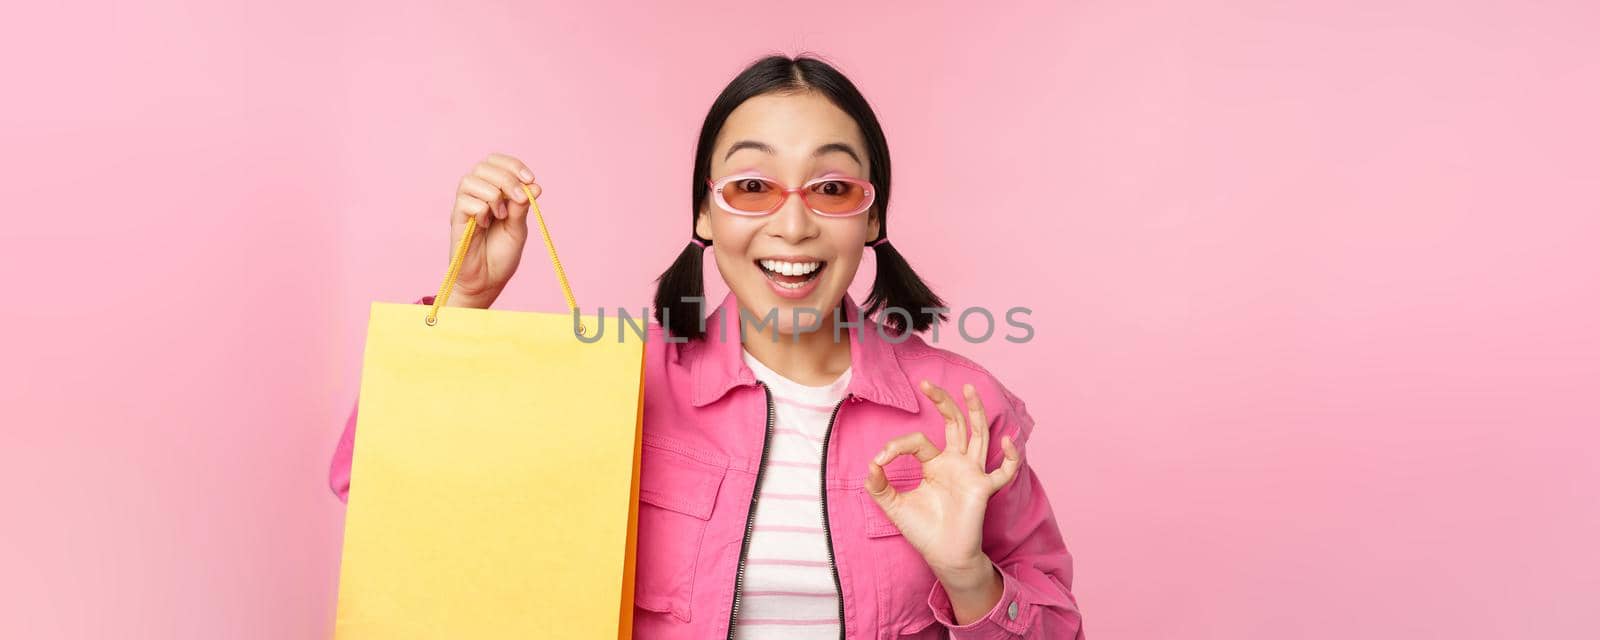 Shopping. Stylish asian girl in sunglasses, showing bag from shop and smiling, recommending sale promo in store, standing over pink background.